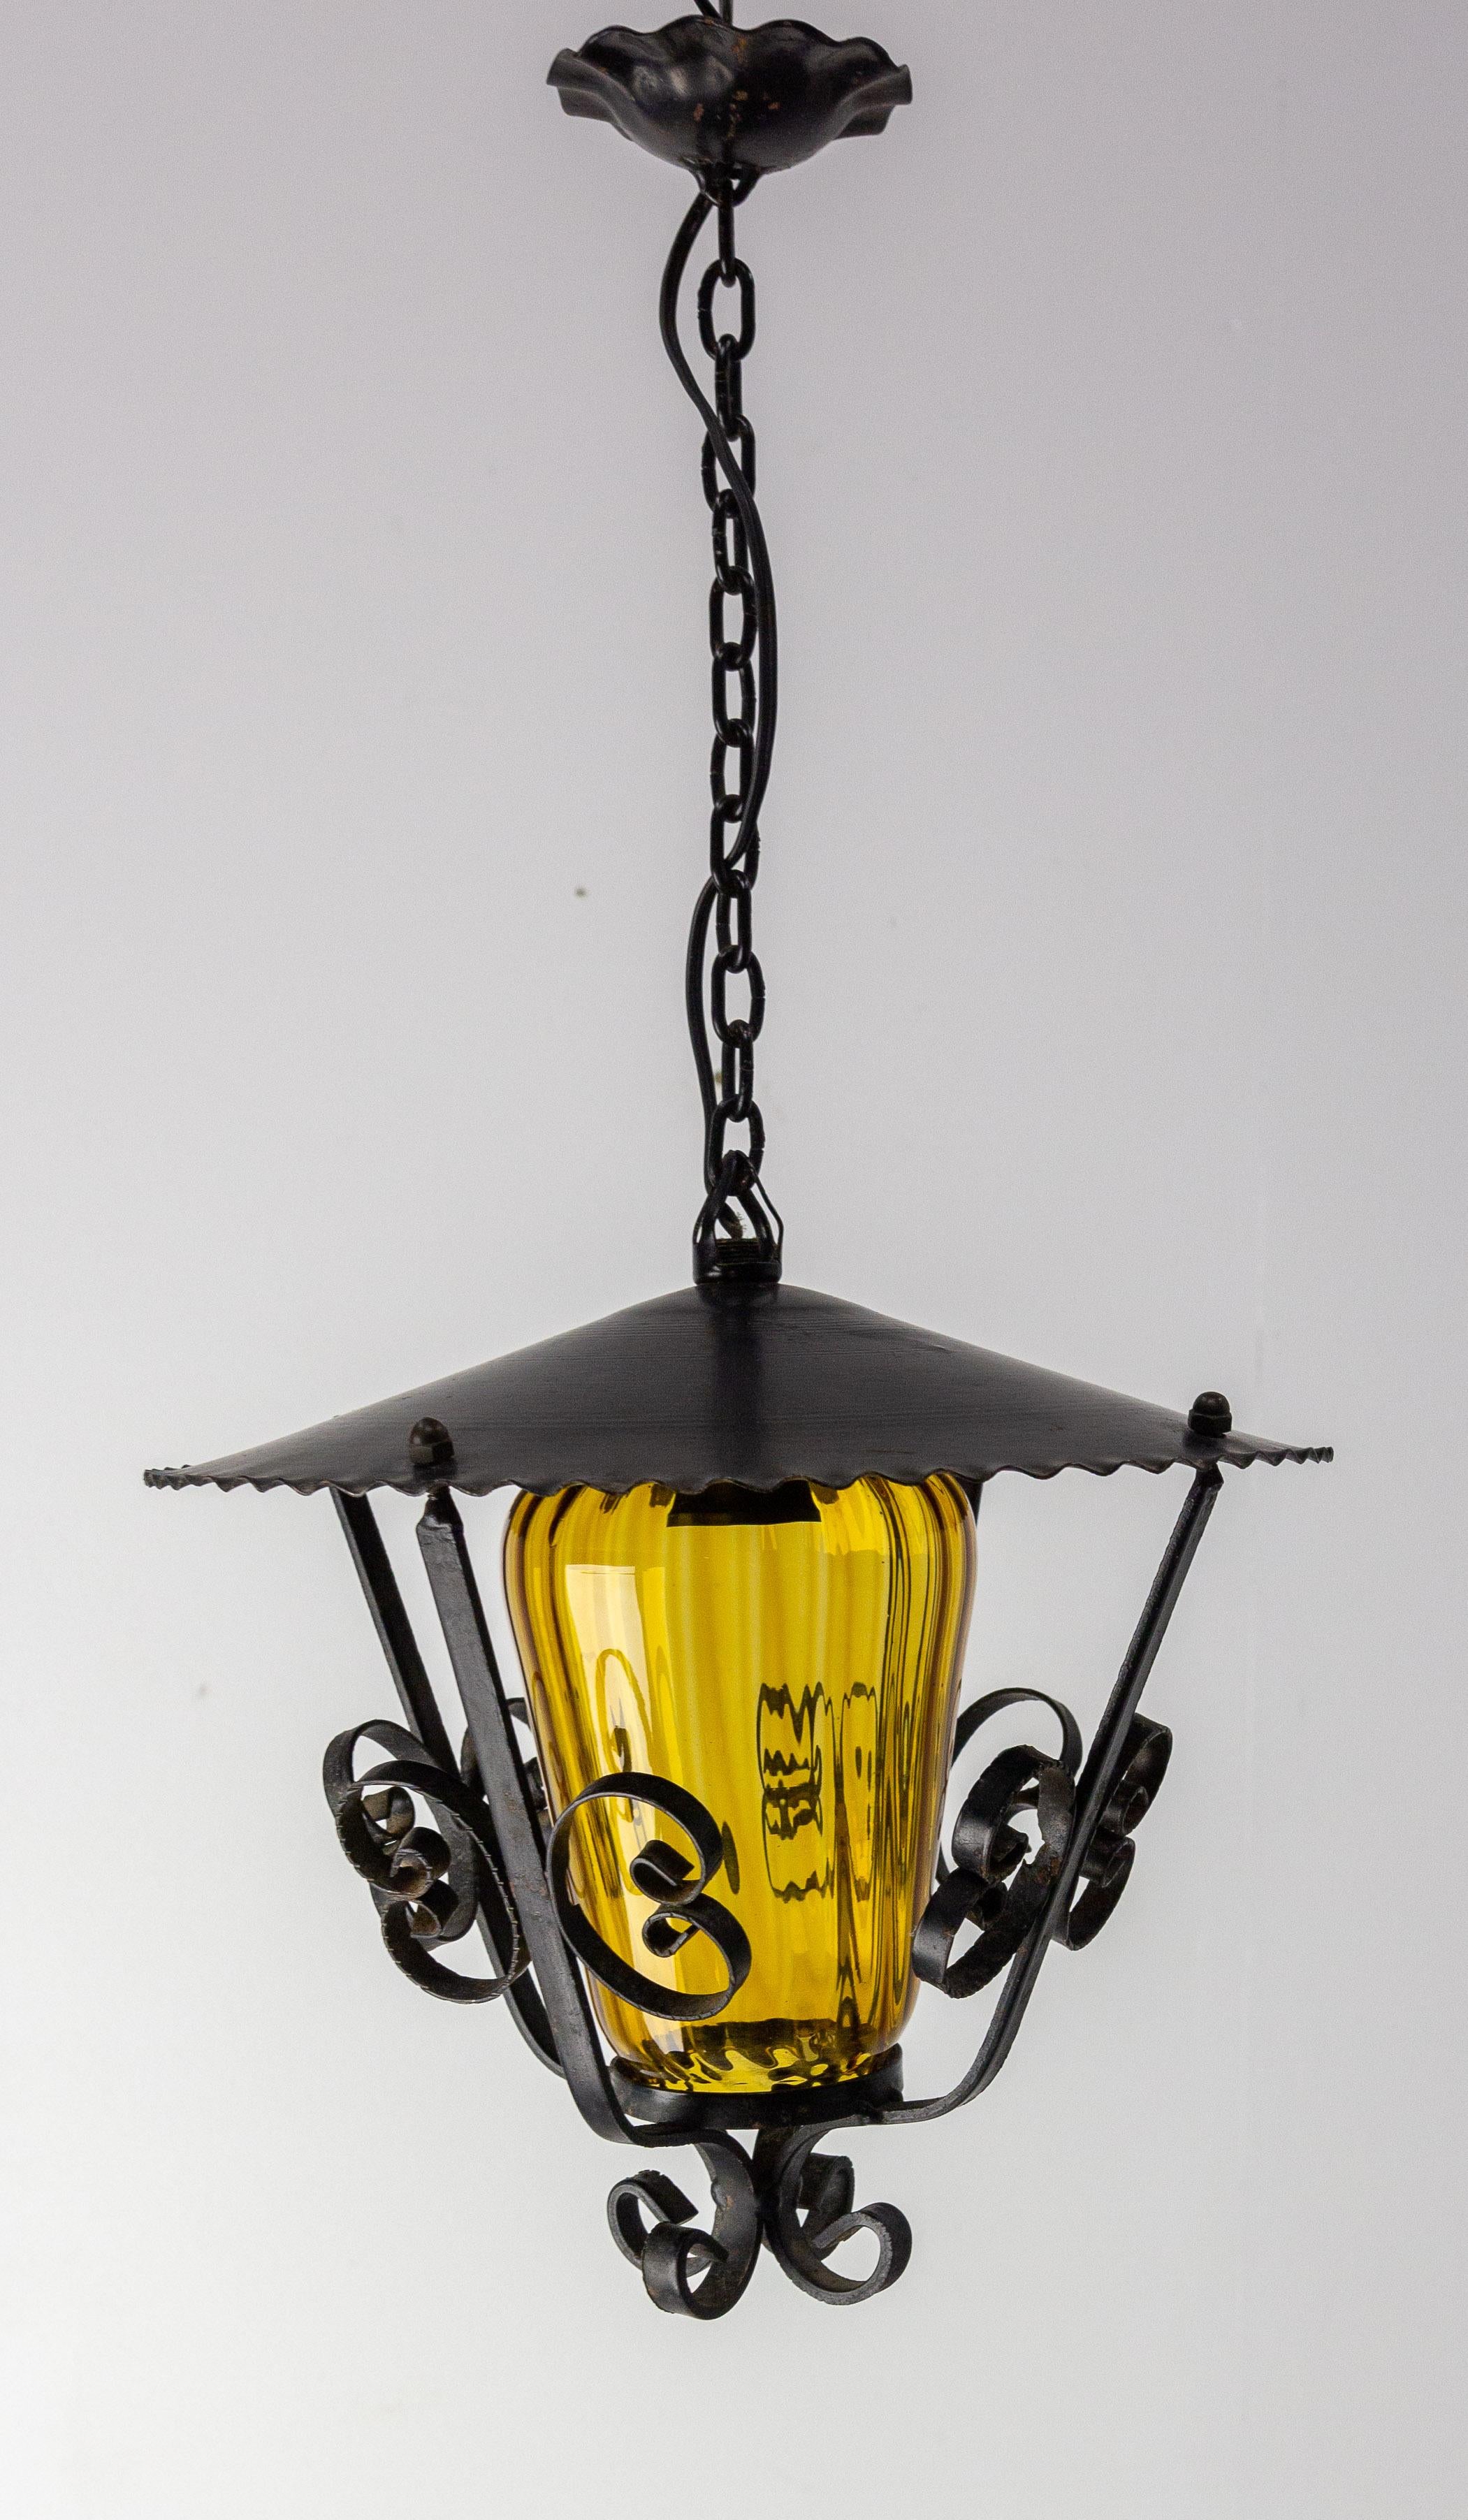 Mid-Century Modern French Ceiling Lamp Wrought Iron and Colored Glass Pendant Lustre, circa 1960 For Sale